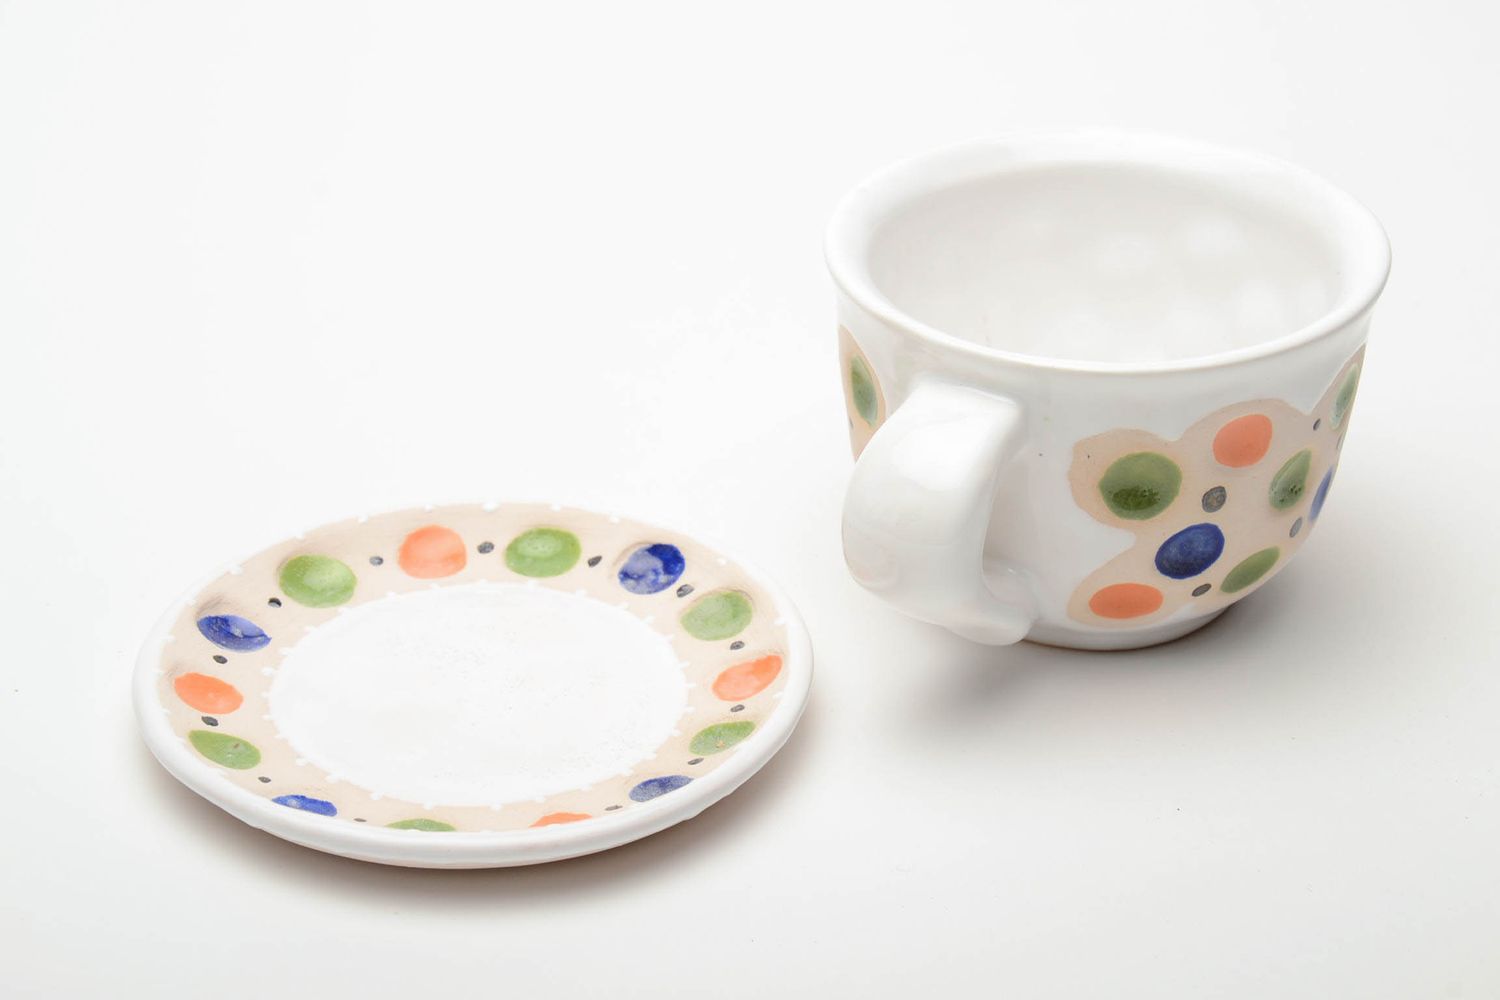  Tea ceramic cup and saucer with handmade pattern 0,63 lb photo 3